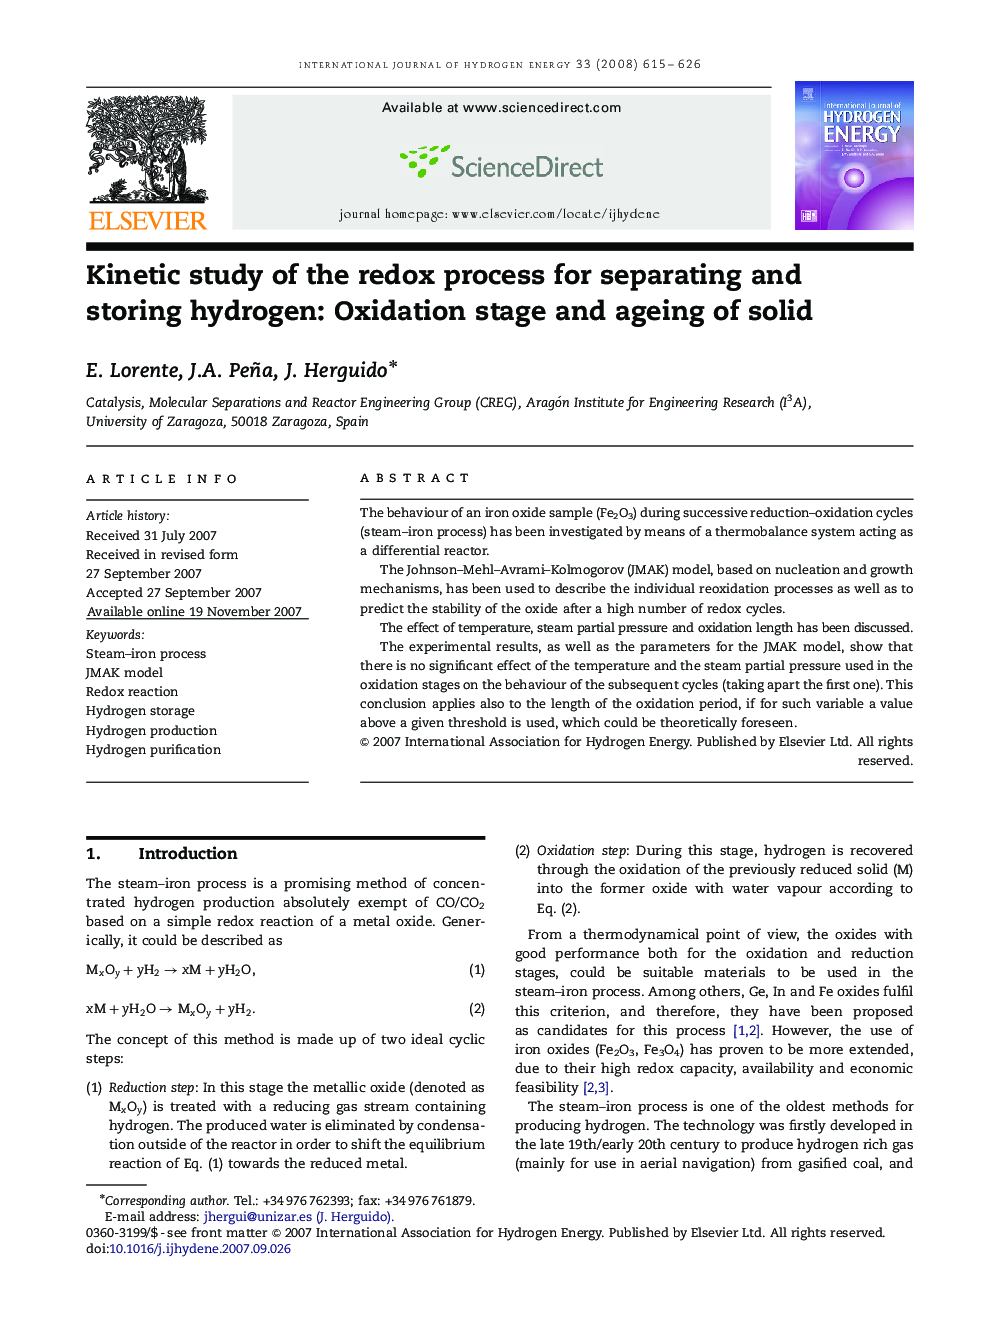 Kinetic study of the redox process for separating and storing hydrogen: Oxidation stage and ageing of solid